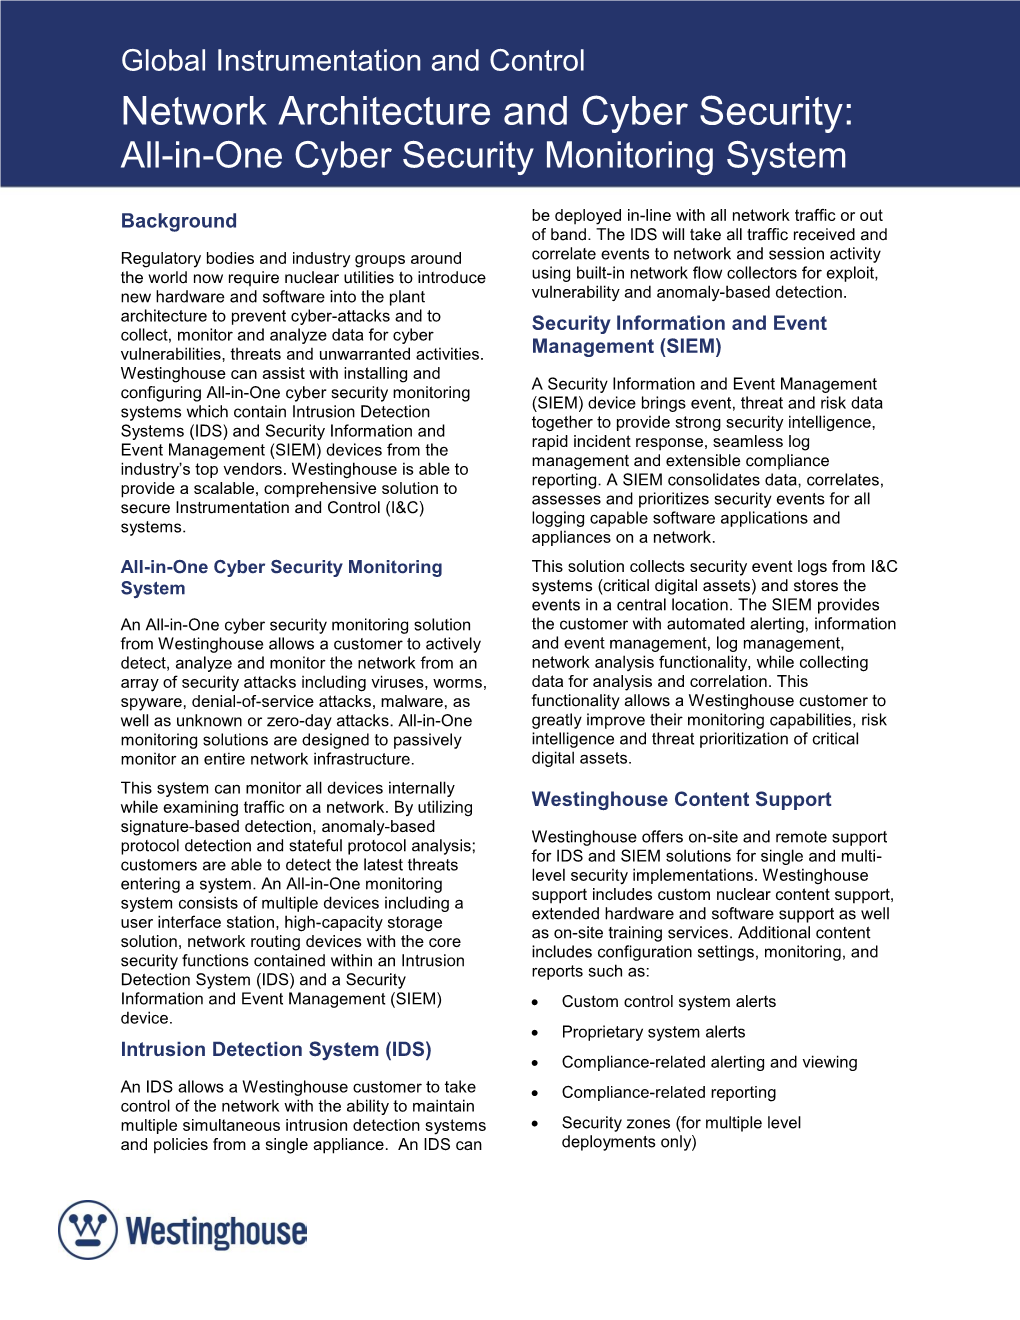 Network Architecture and Cyber Security: All-In-One Cyber Security Monitoring System